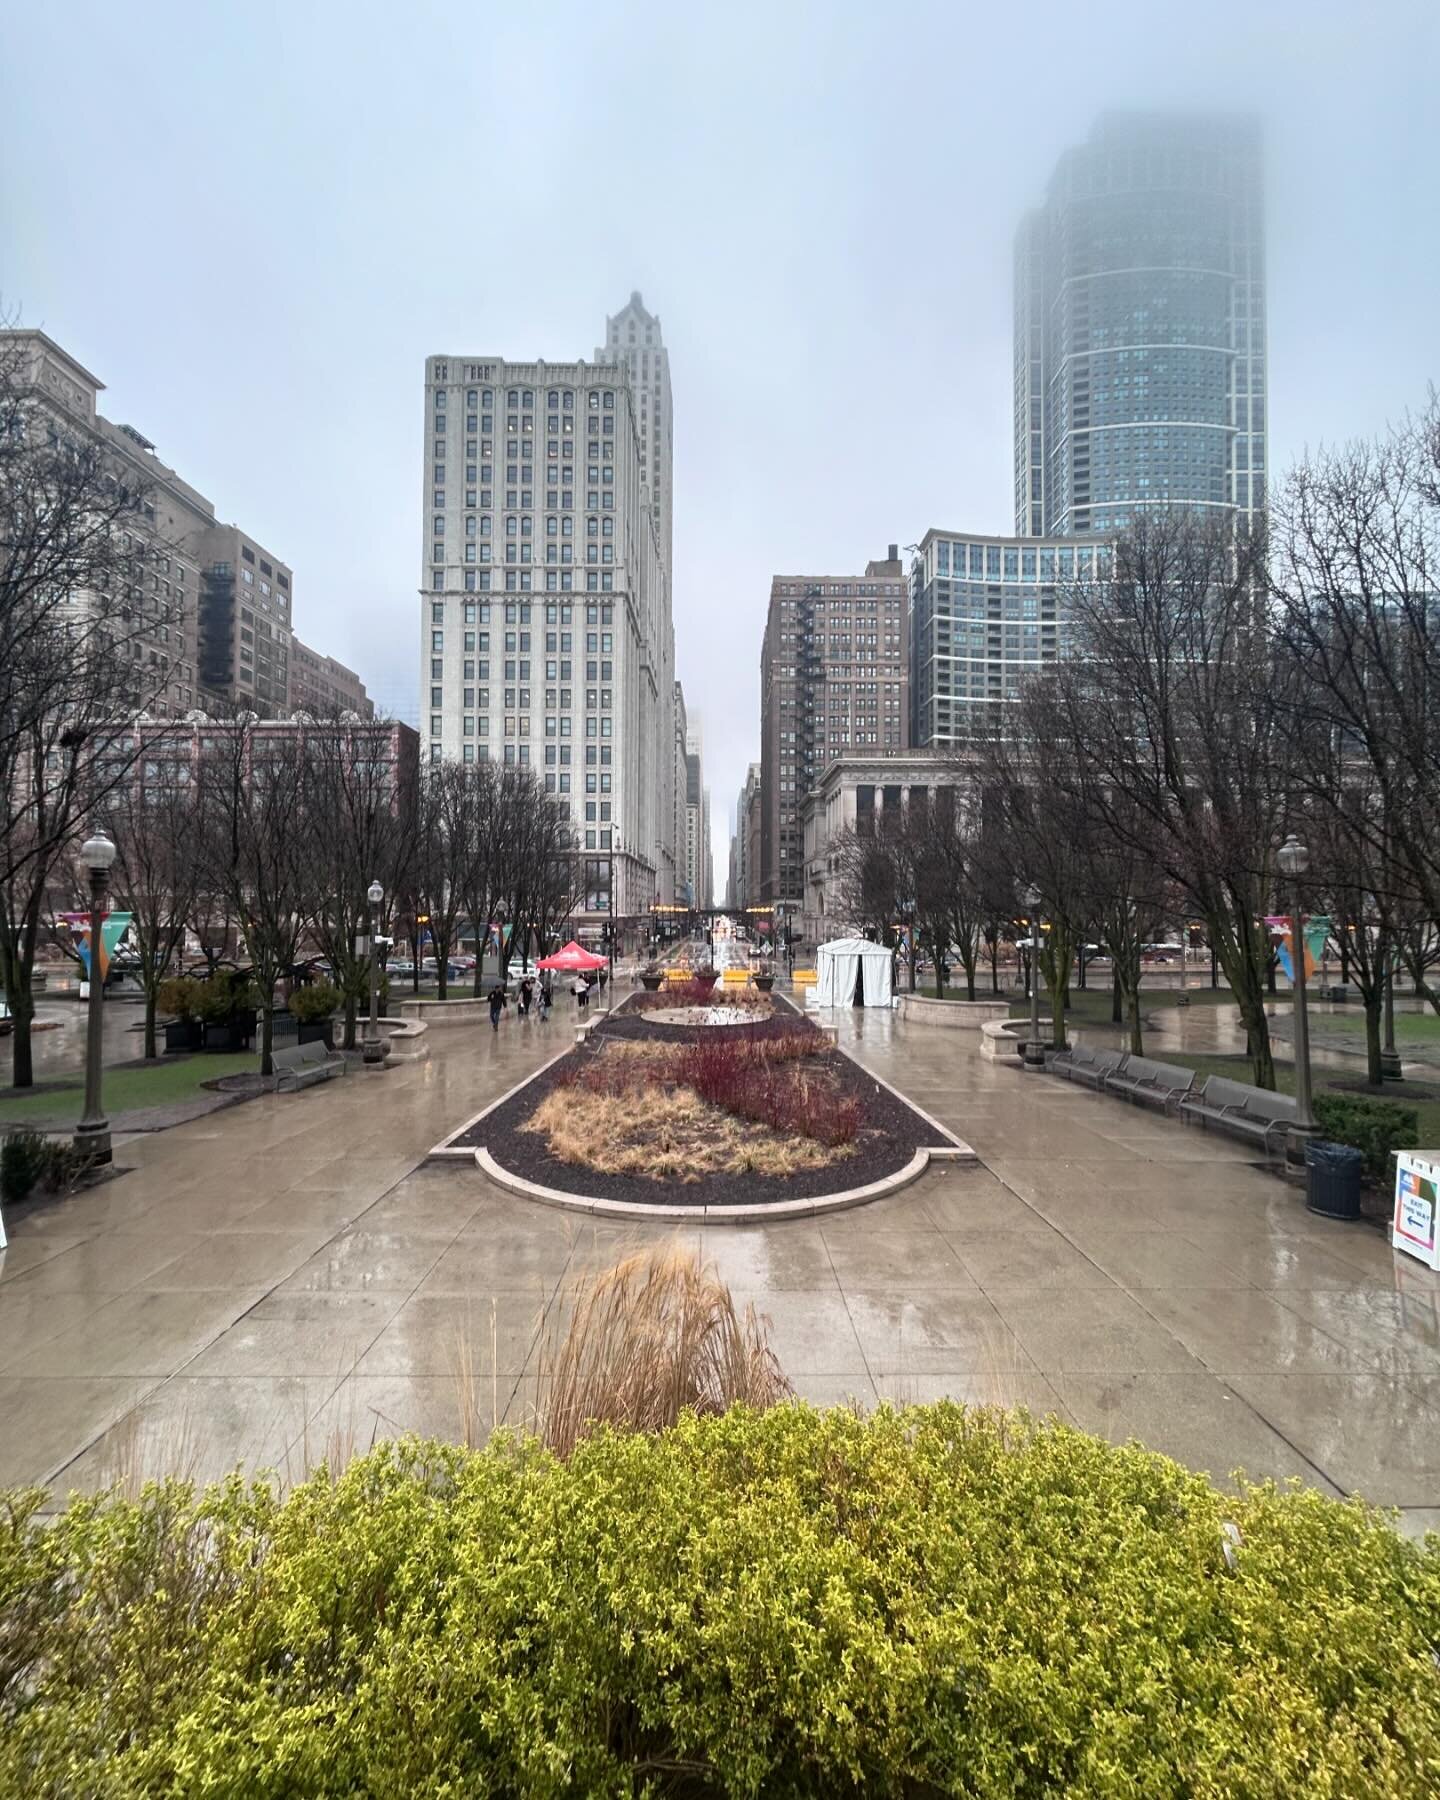 Chicago - short trip but will be back to the Windy City. 
First day was freezing cold and rainy next day was gorgeous and sunny. The views and Tilt glass experience at 360 Chicago are stunning. Personally not a fan of their pizza but i haven&rsquo;t 